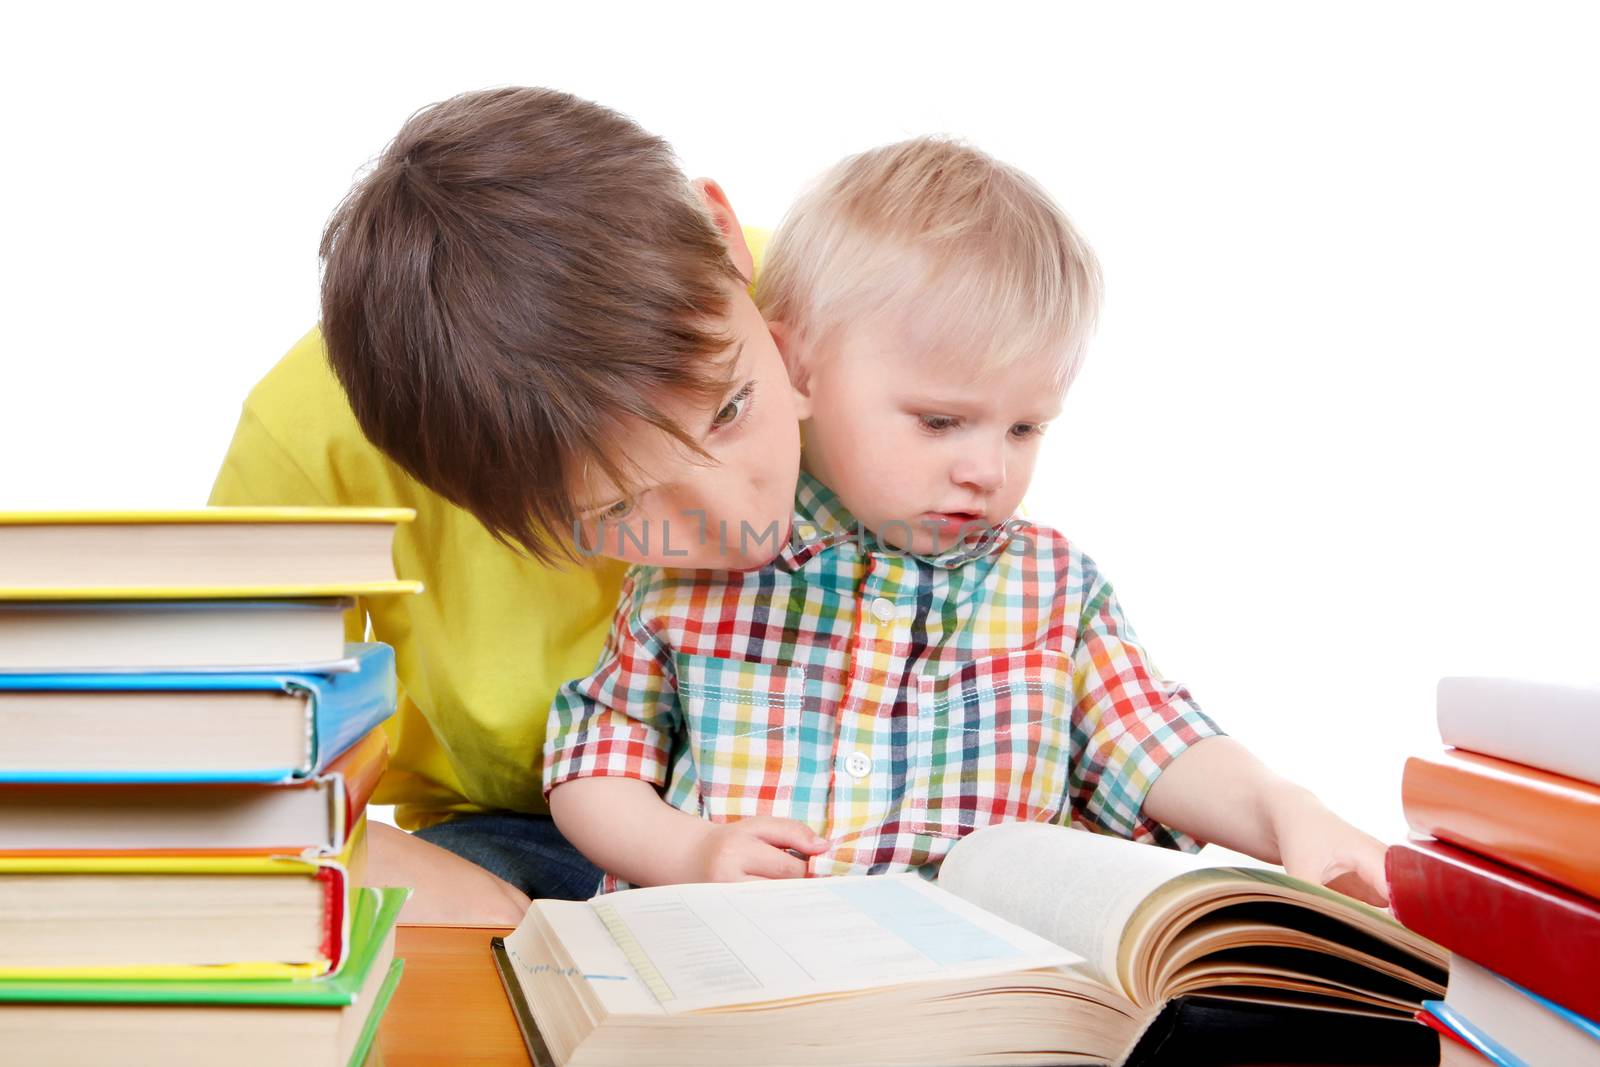 Kid and Baby Boy with the Books at the Desk Isolated on the White Background